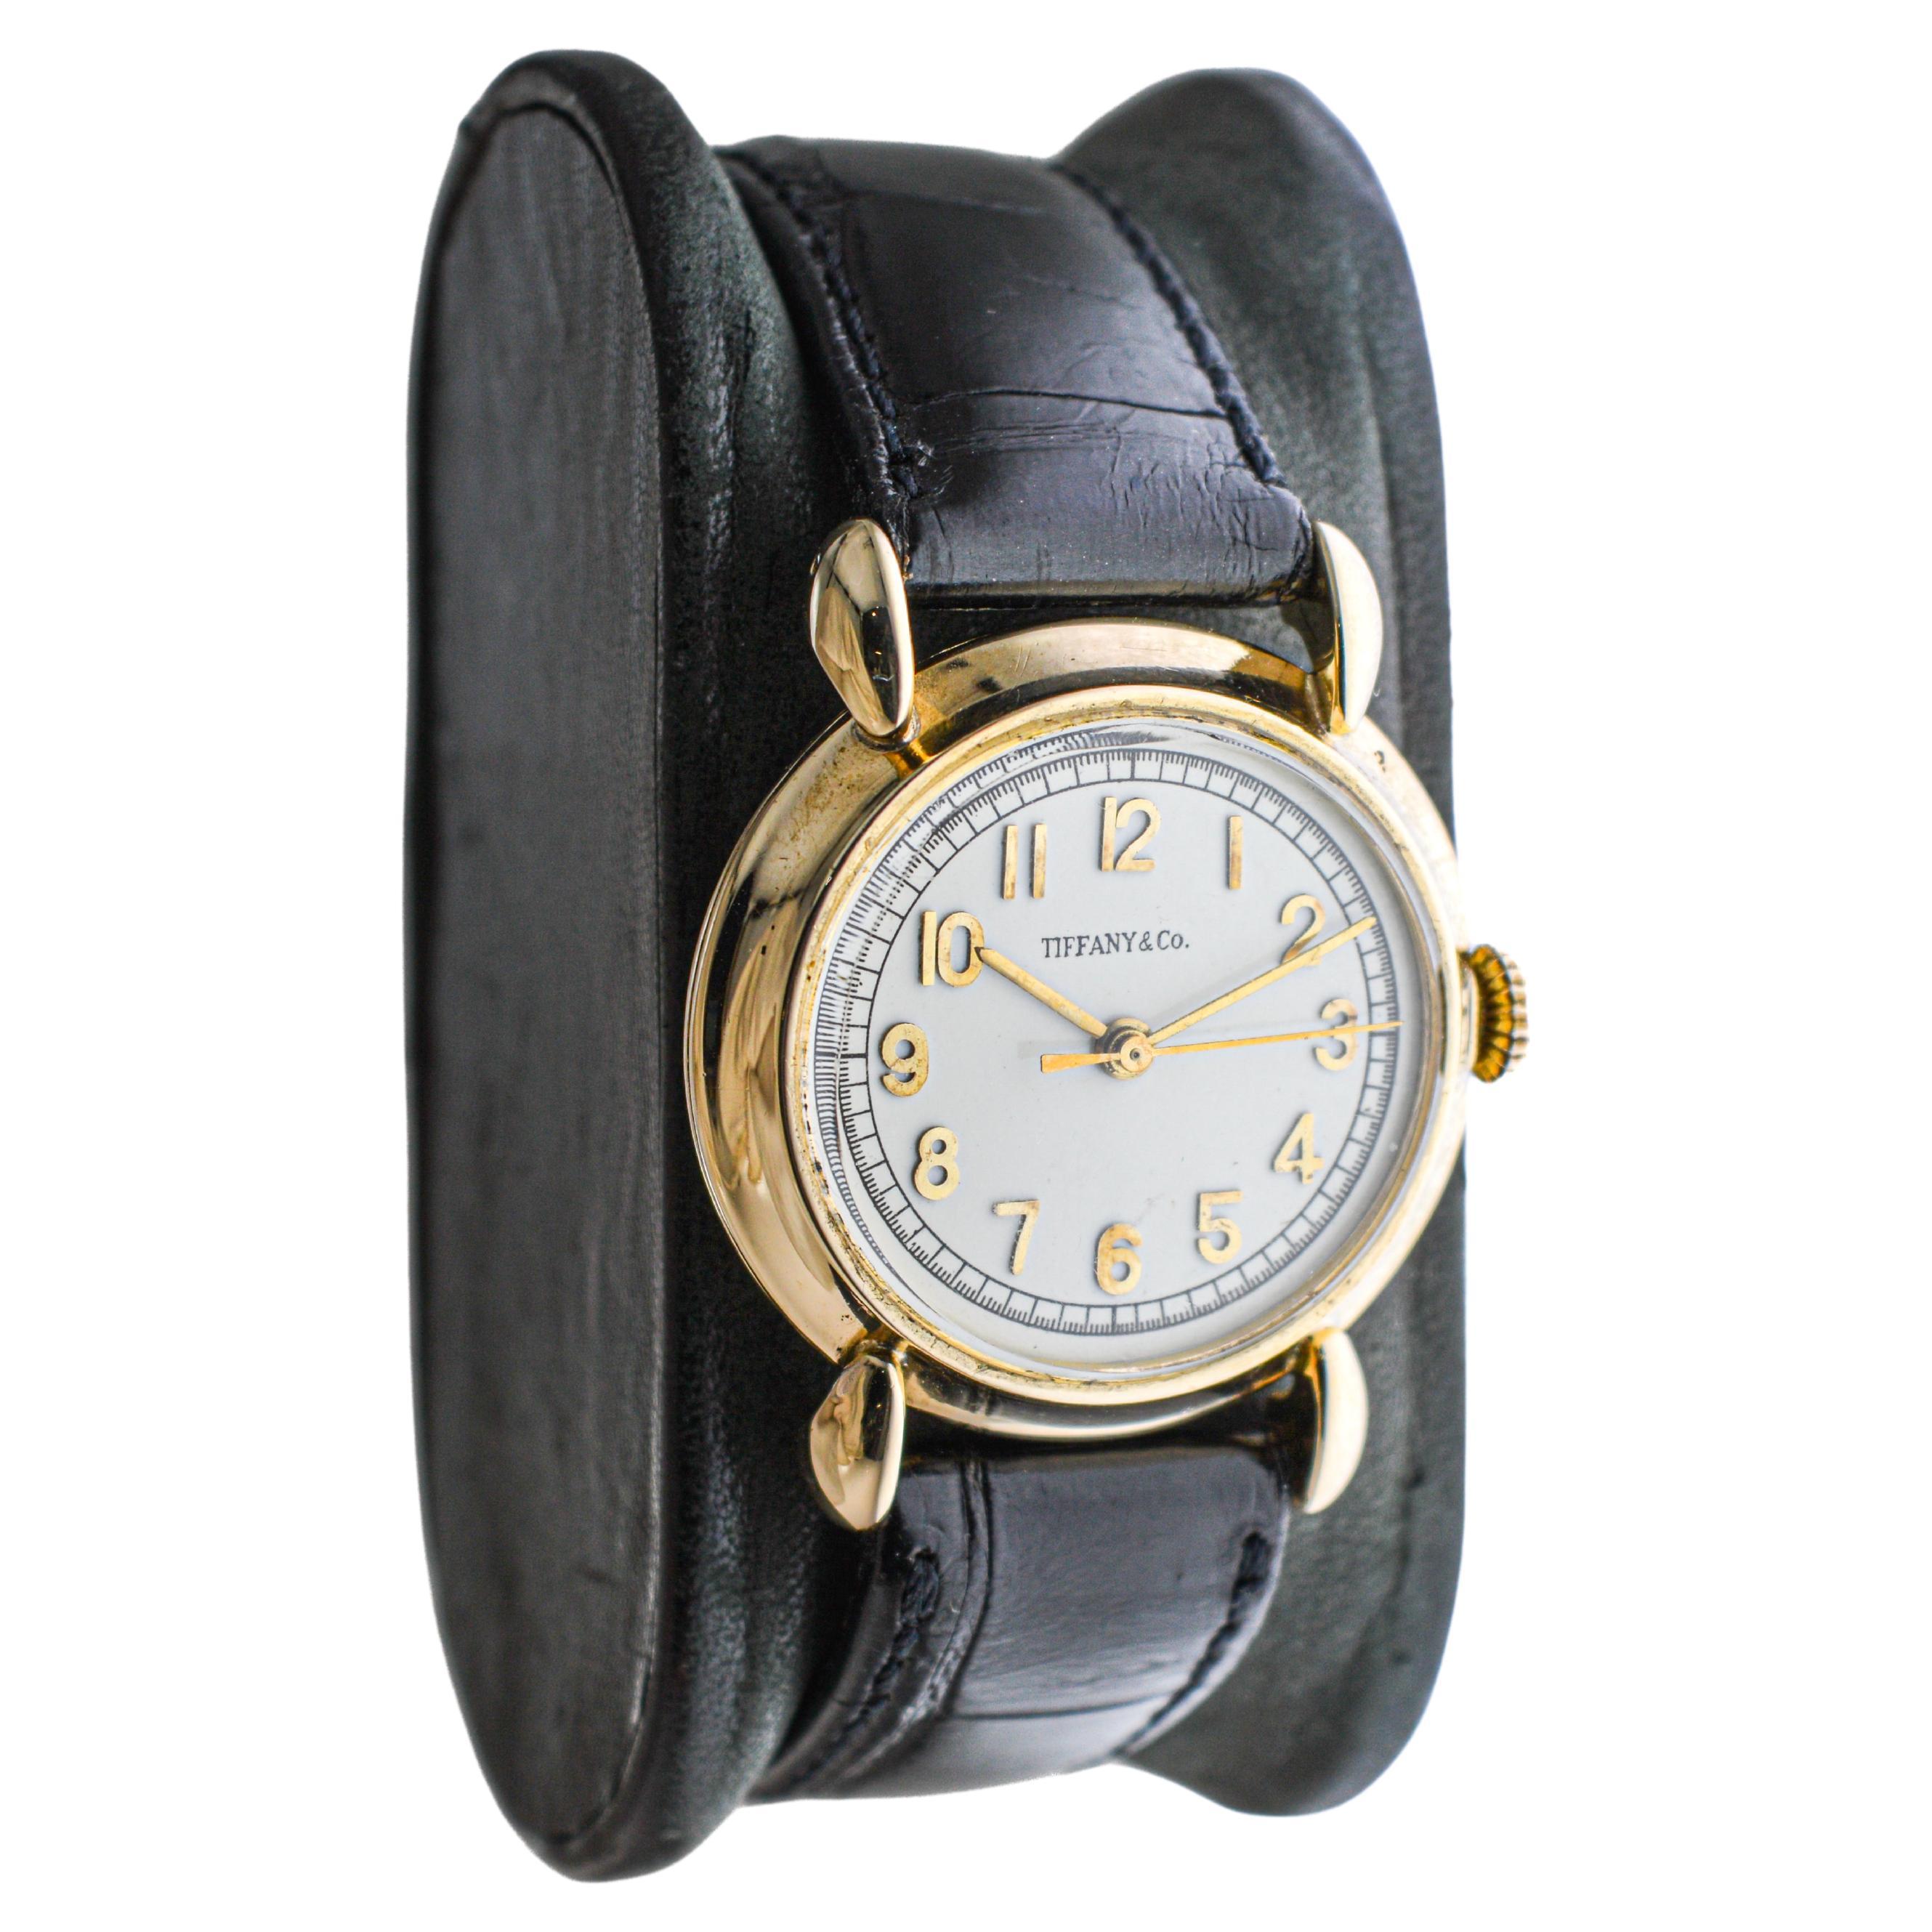 FACTORY / HOUSE: International Watch Company, Schaffhausen Switzerland
STYLE / REFERENCE: Art Deco / Round Style 
METAL / MATERIAL: 14 Kt. Yellow Gold
DIMENSIONS: Length 37mm  X Diameter 30mm
CIRCA: 1949
MOVEMENT / CALIBER: 17 Jewels / High Grade /